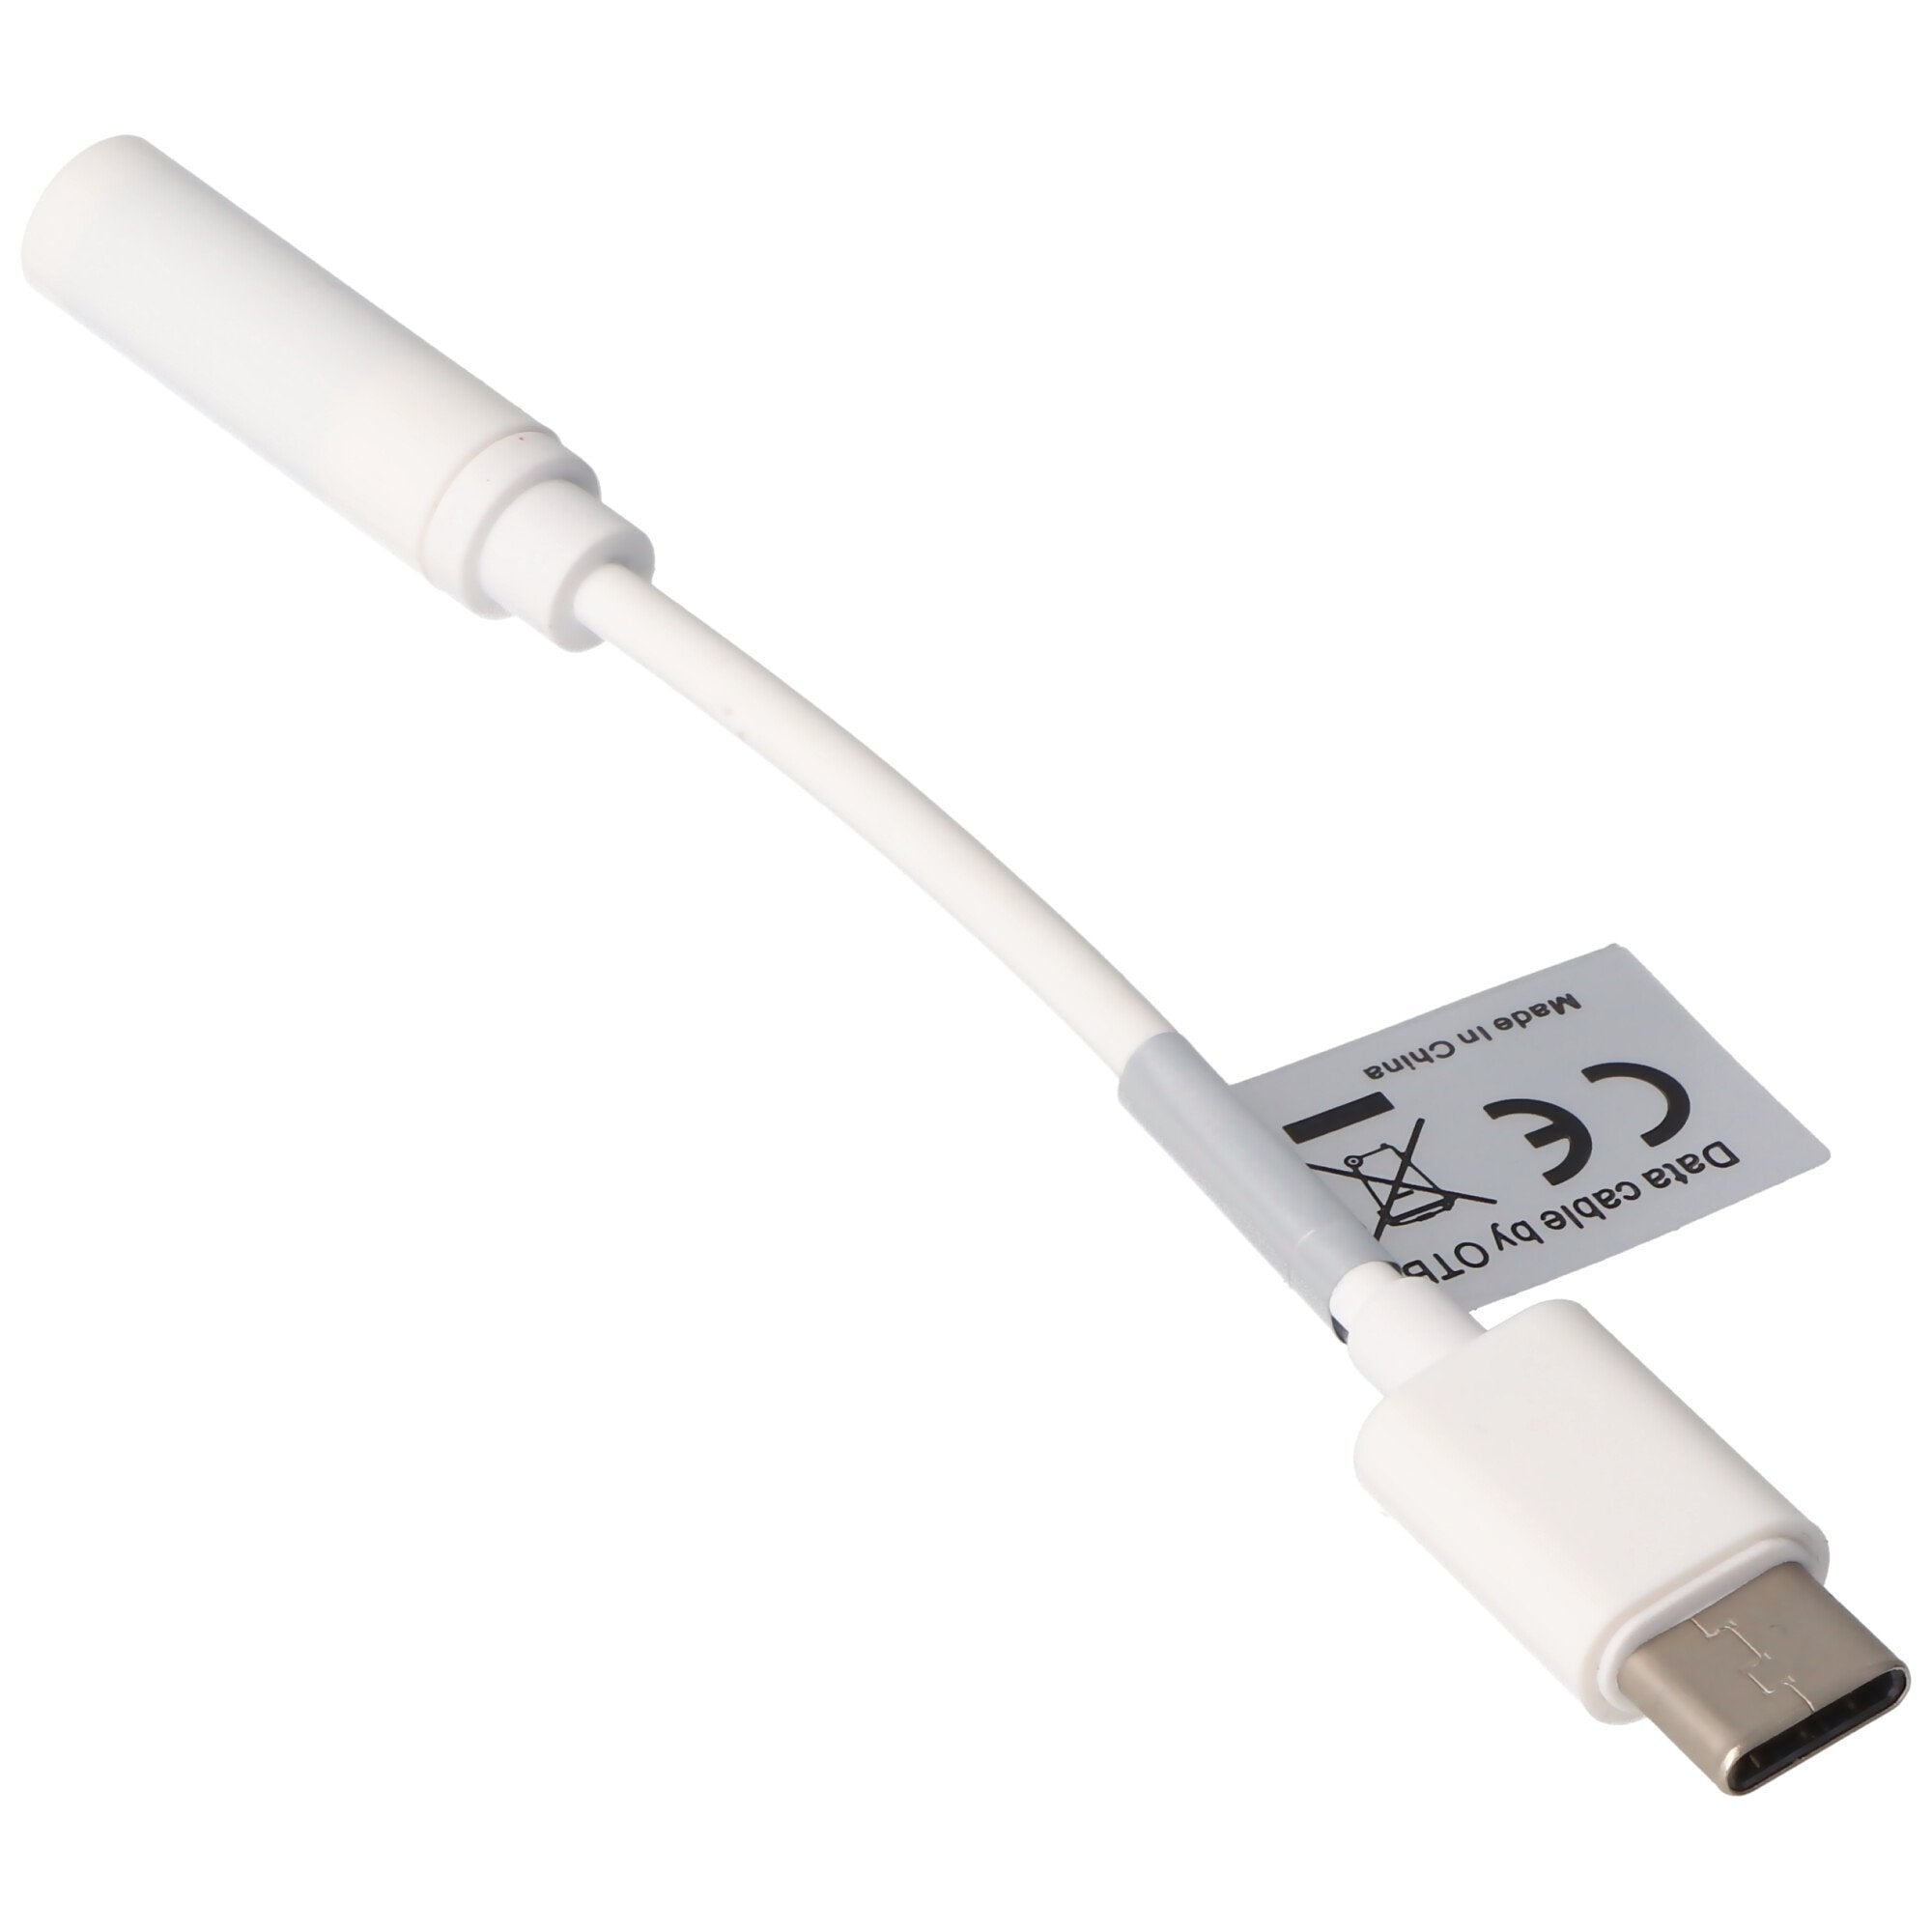 AUDIO AND HEADSET ADAPTER from USB TYPE C USB-C to a 3.5MM STEREO CABLE